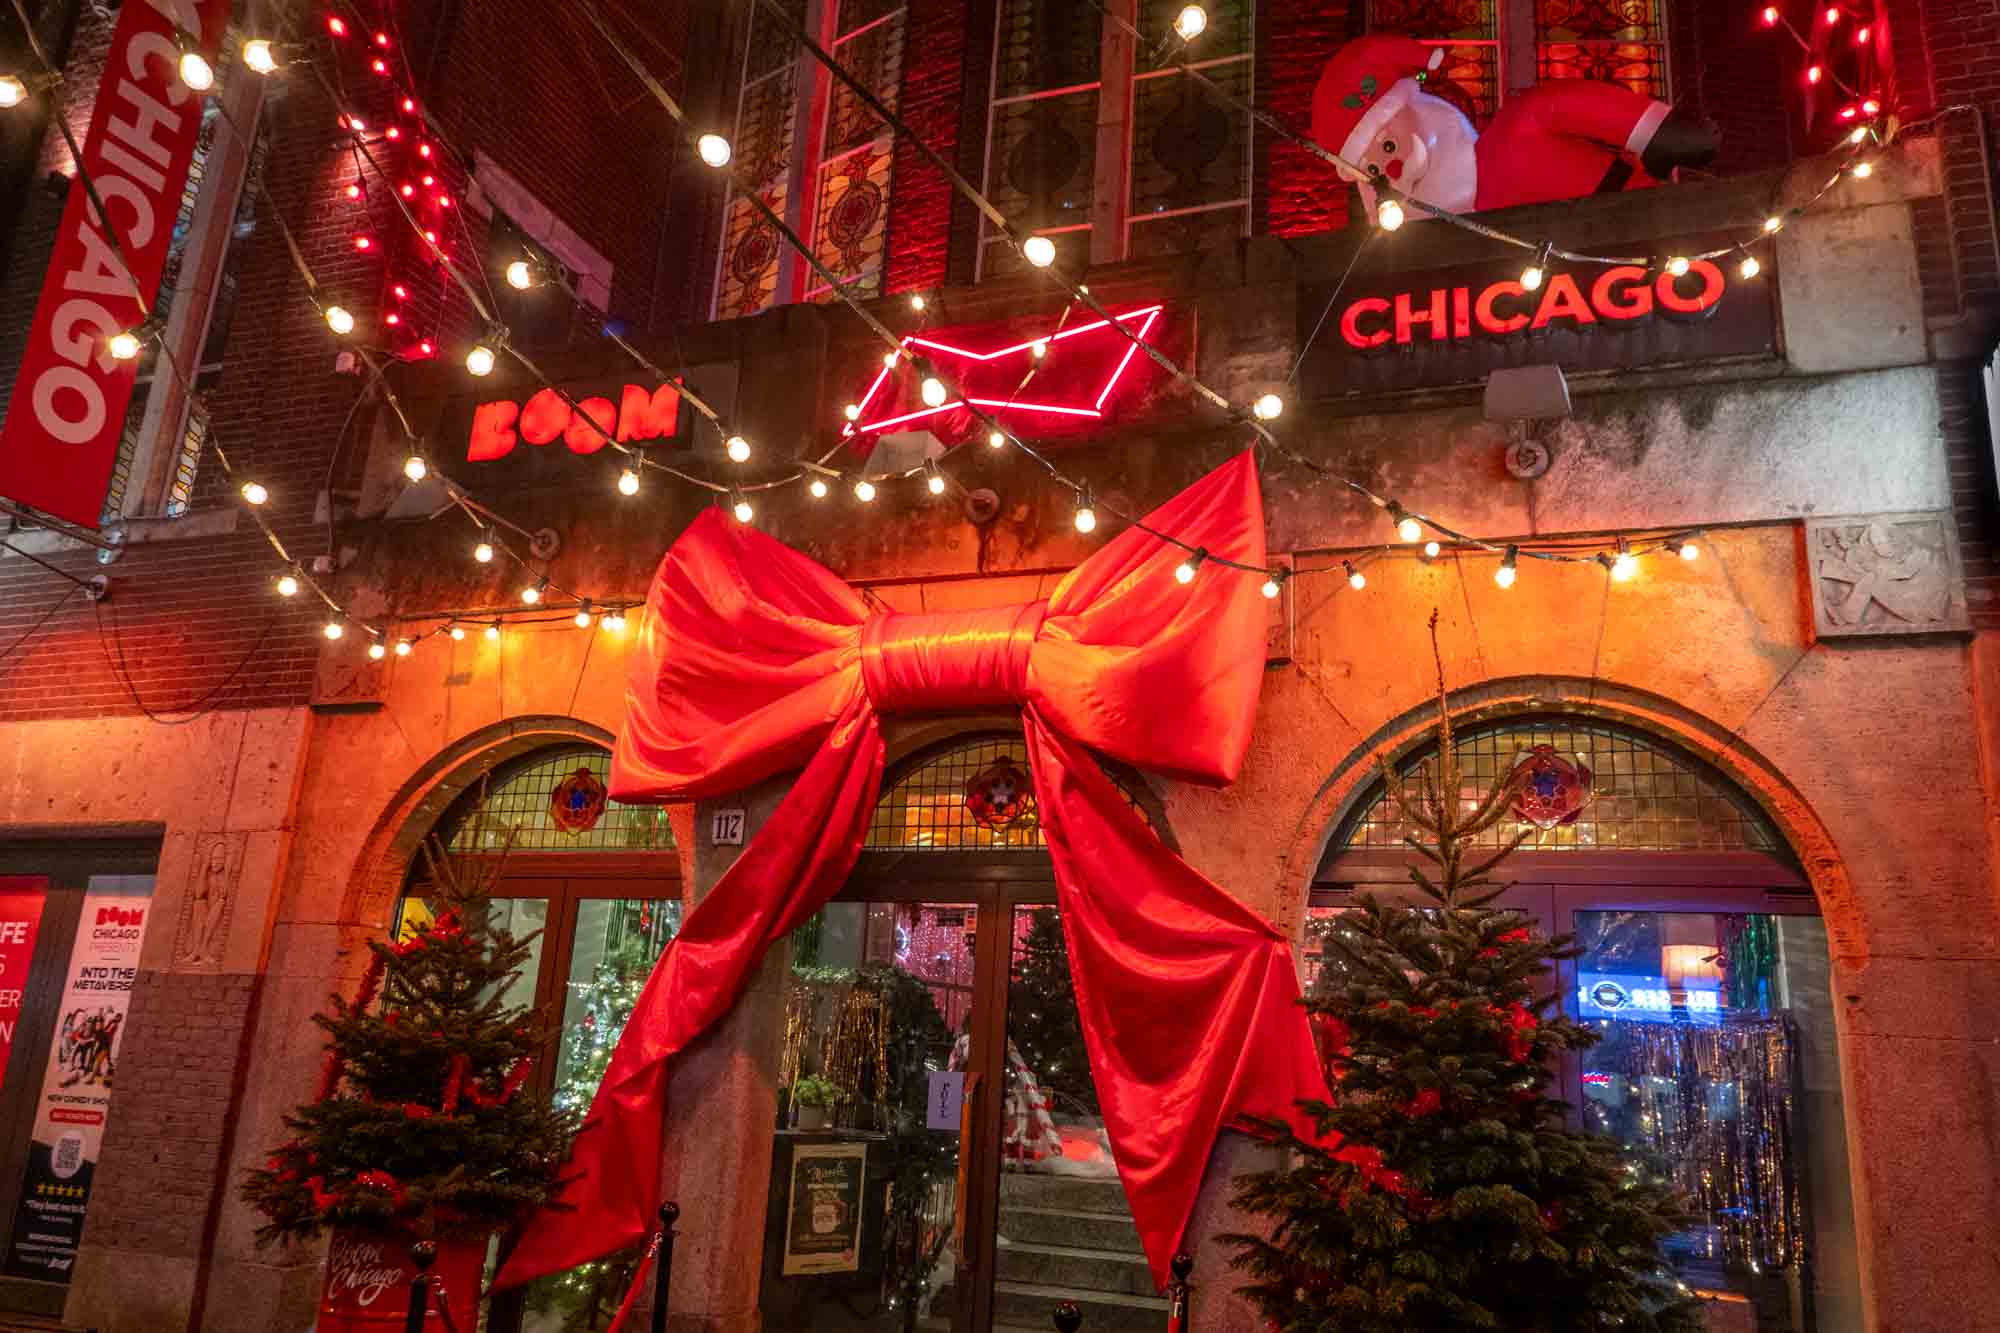 Storefront with a giant red bow and Christmas decorations and a sign for "Boom Chicago."